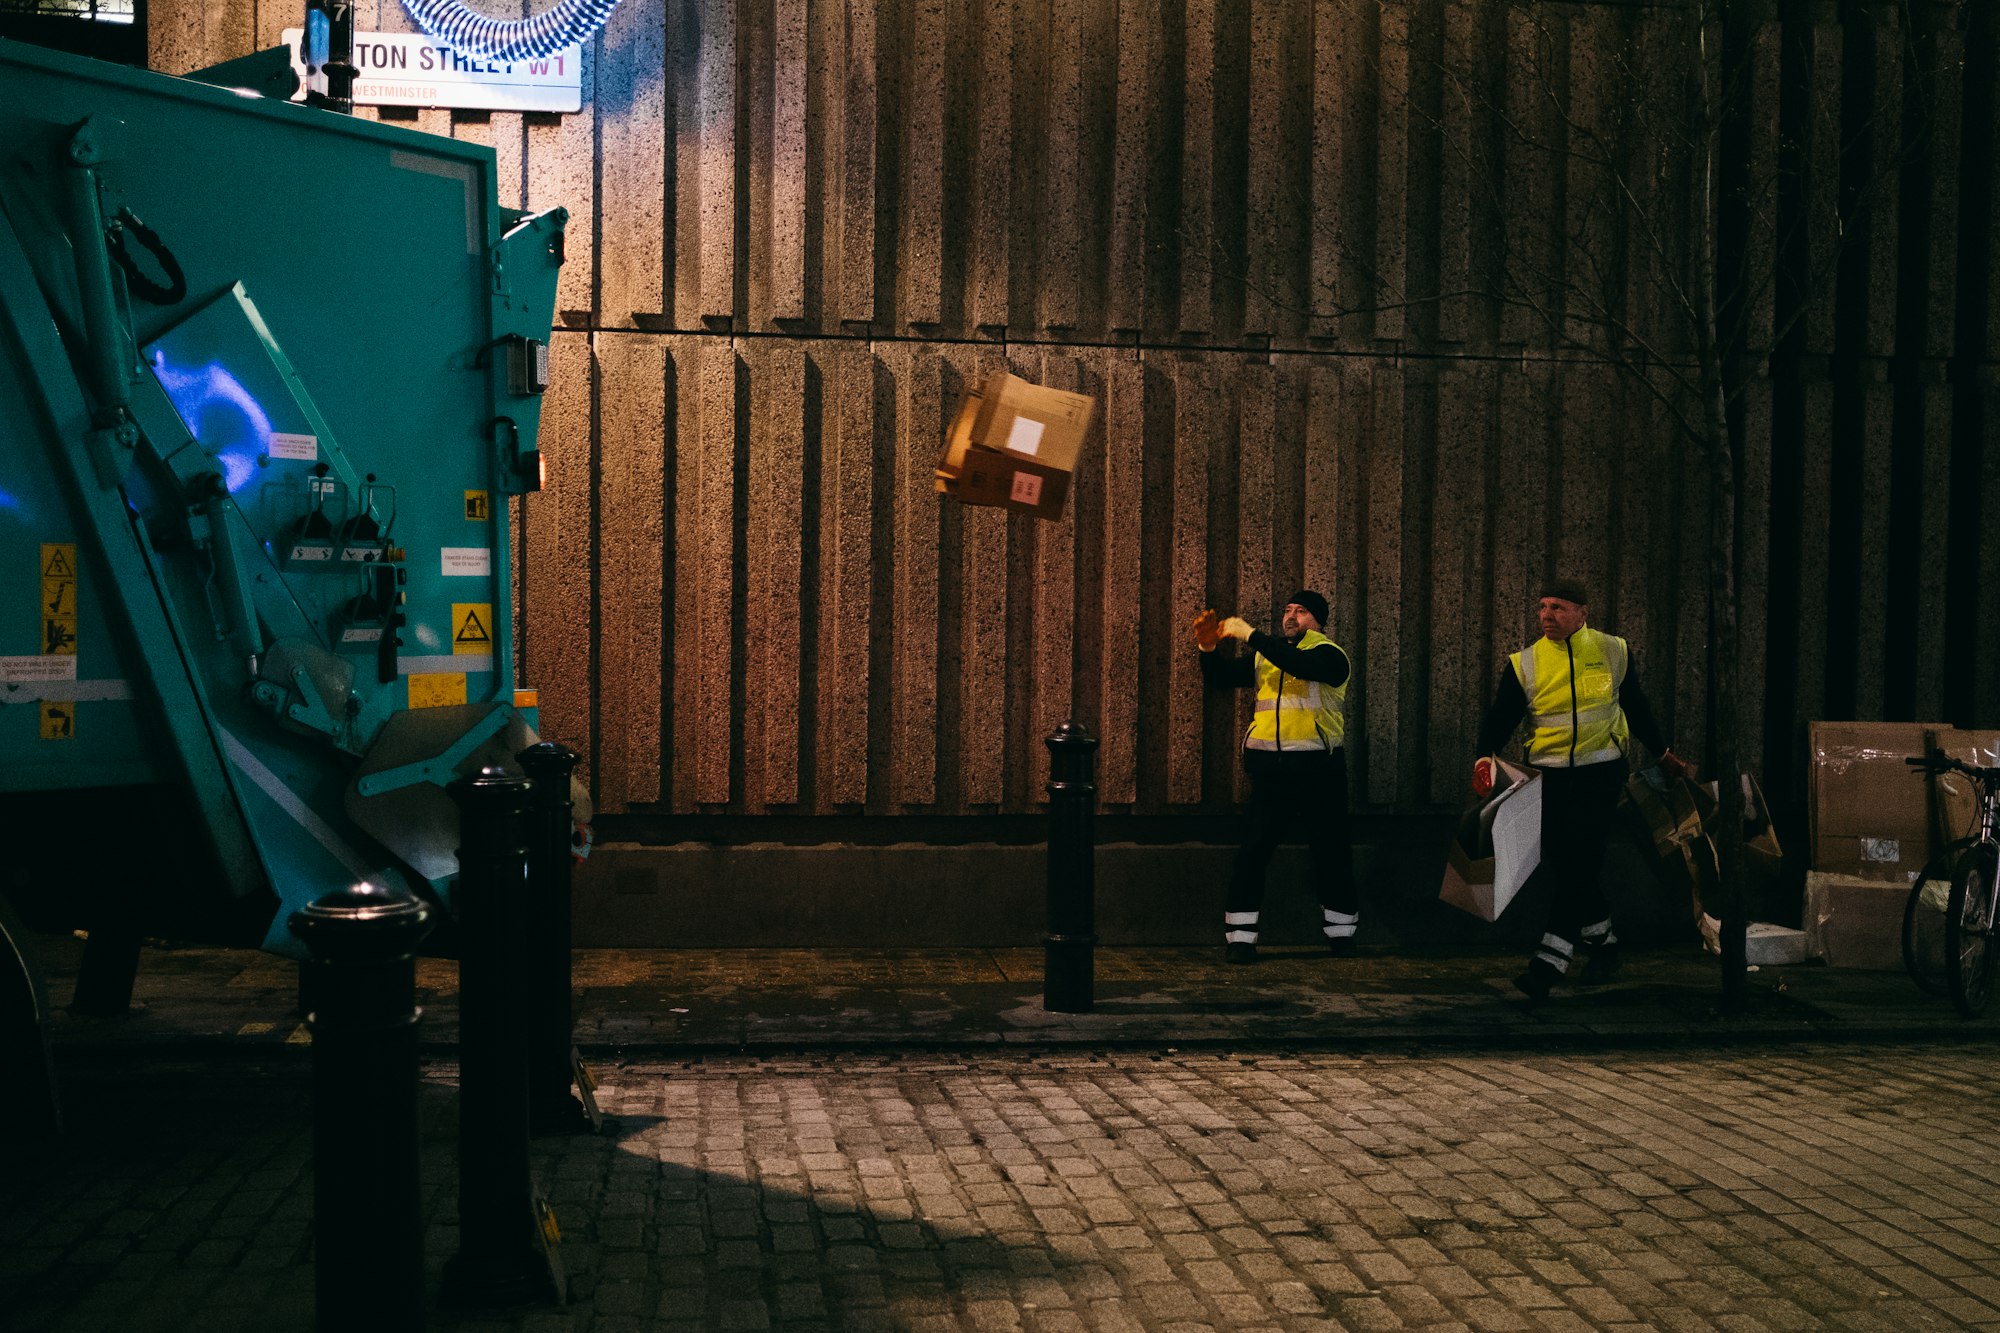 two man standing beside the building throwing garbage into a truck